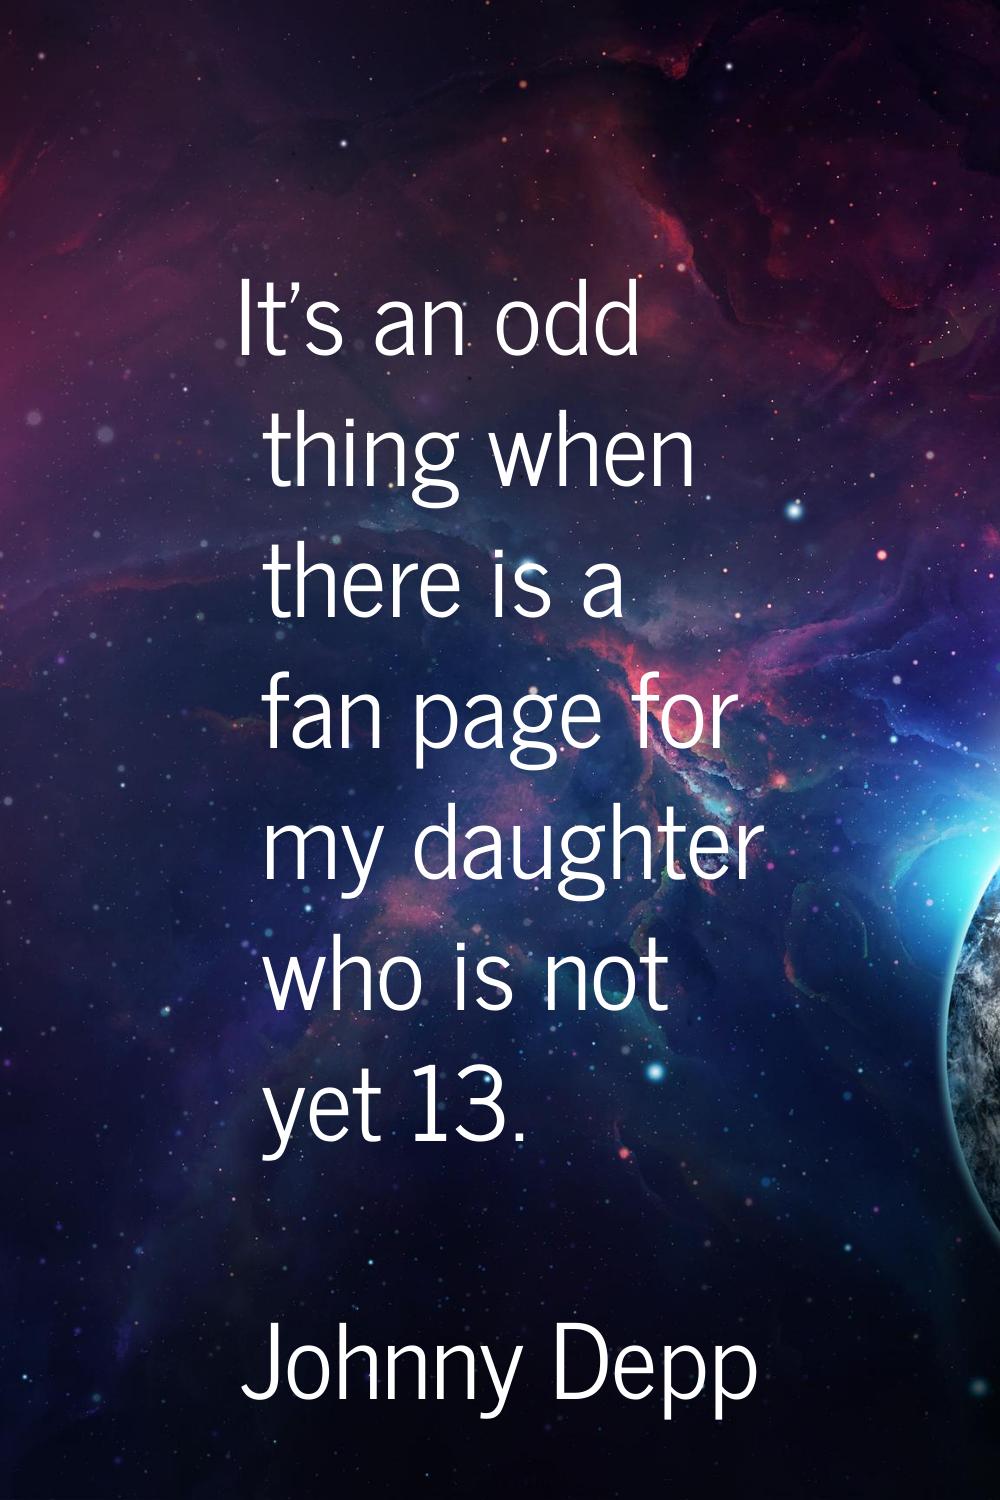 It's an odd thing when there is a fan page for my daughter who is not yet 13.